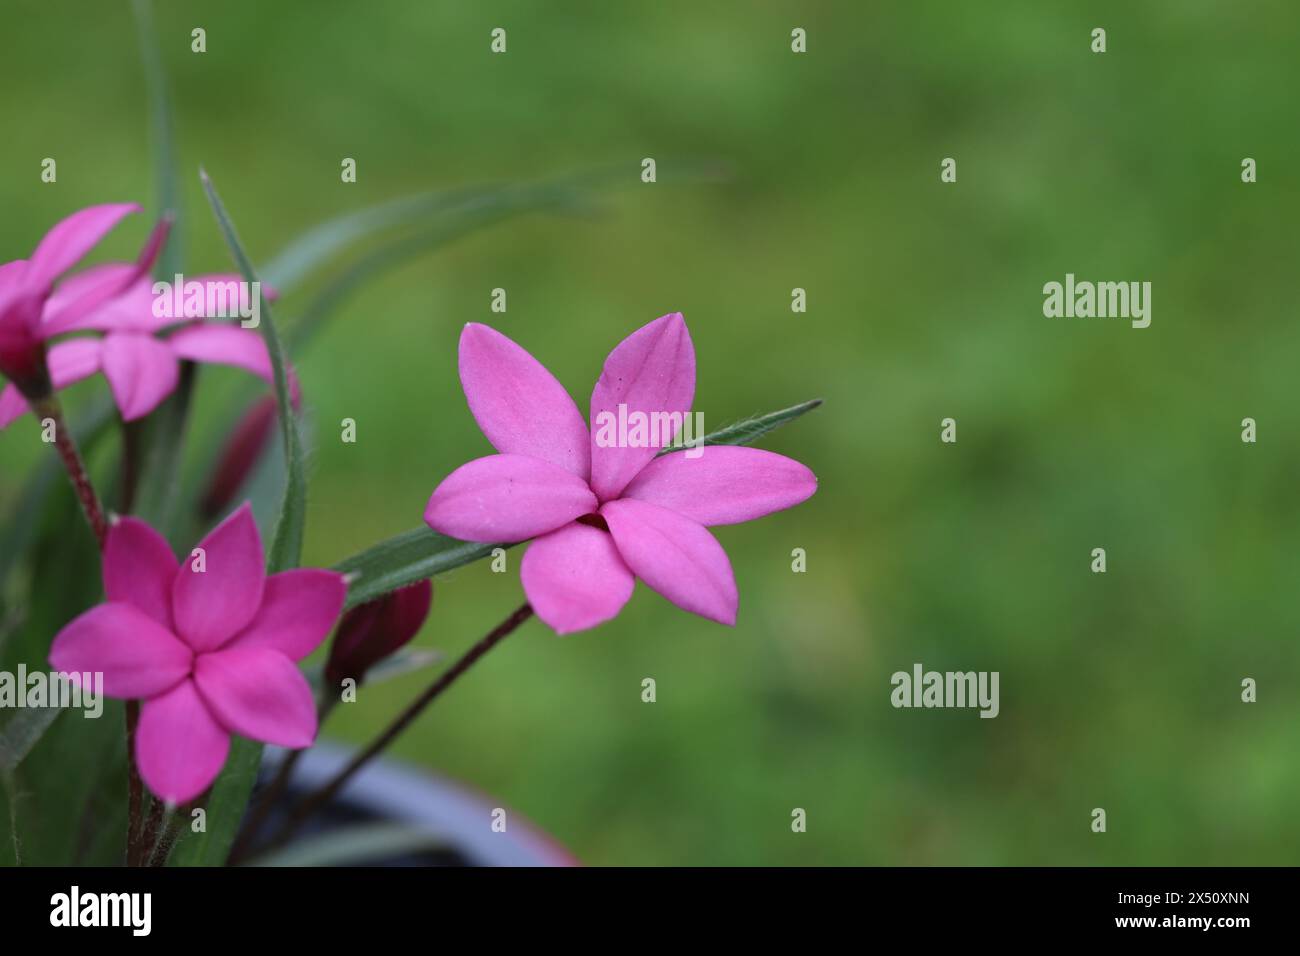 Close-up view of single pink rhodohypoxis flowers with selective focus against a green blurred background Stock Photo